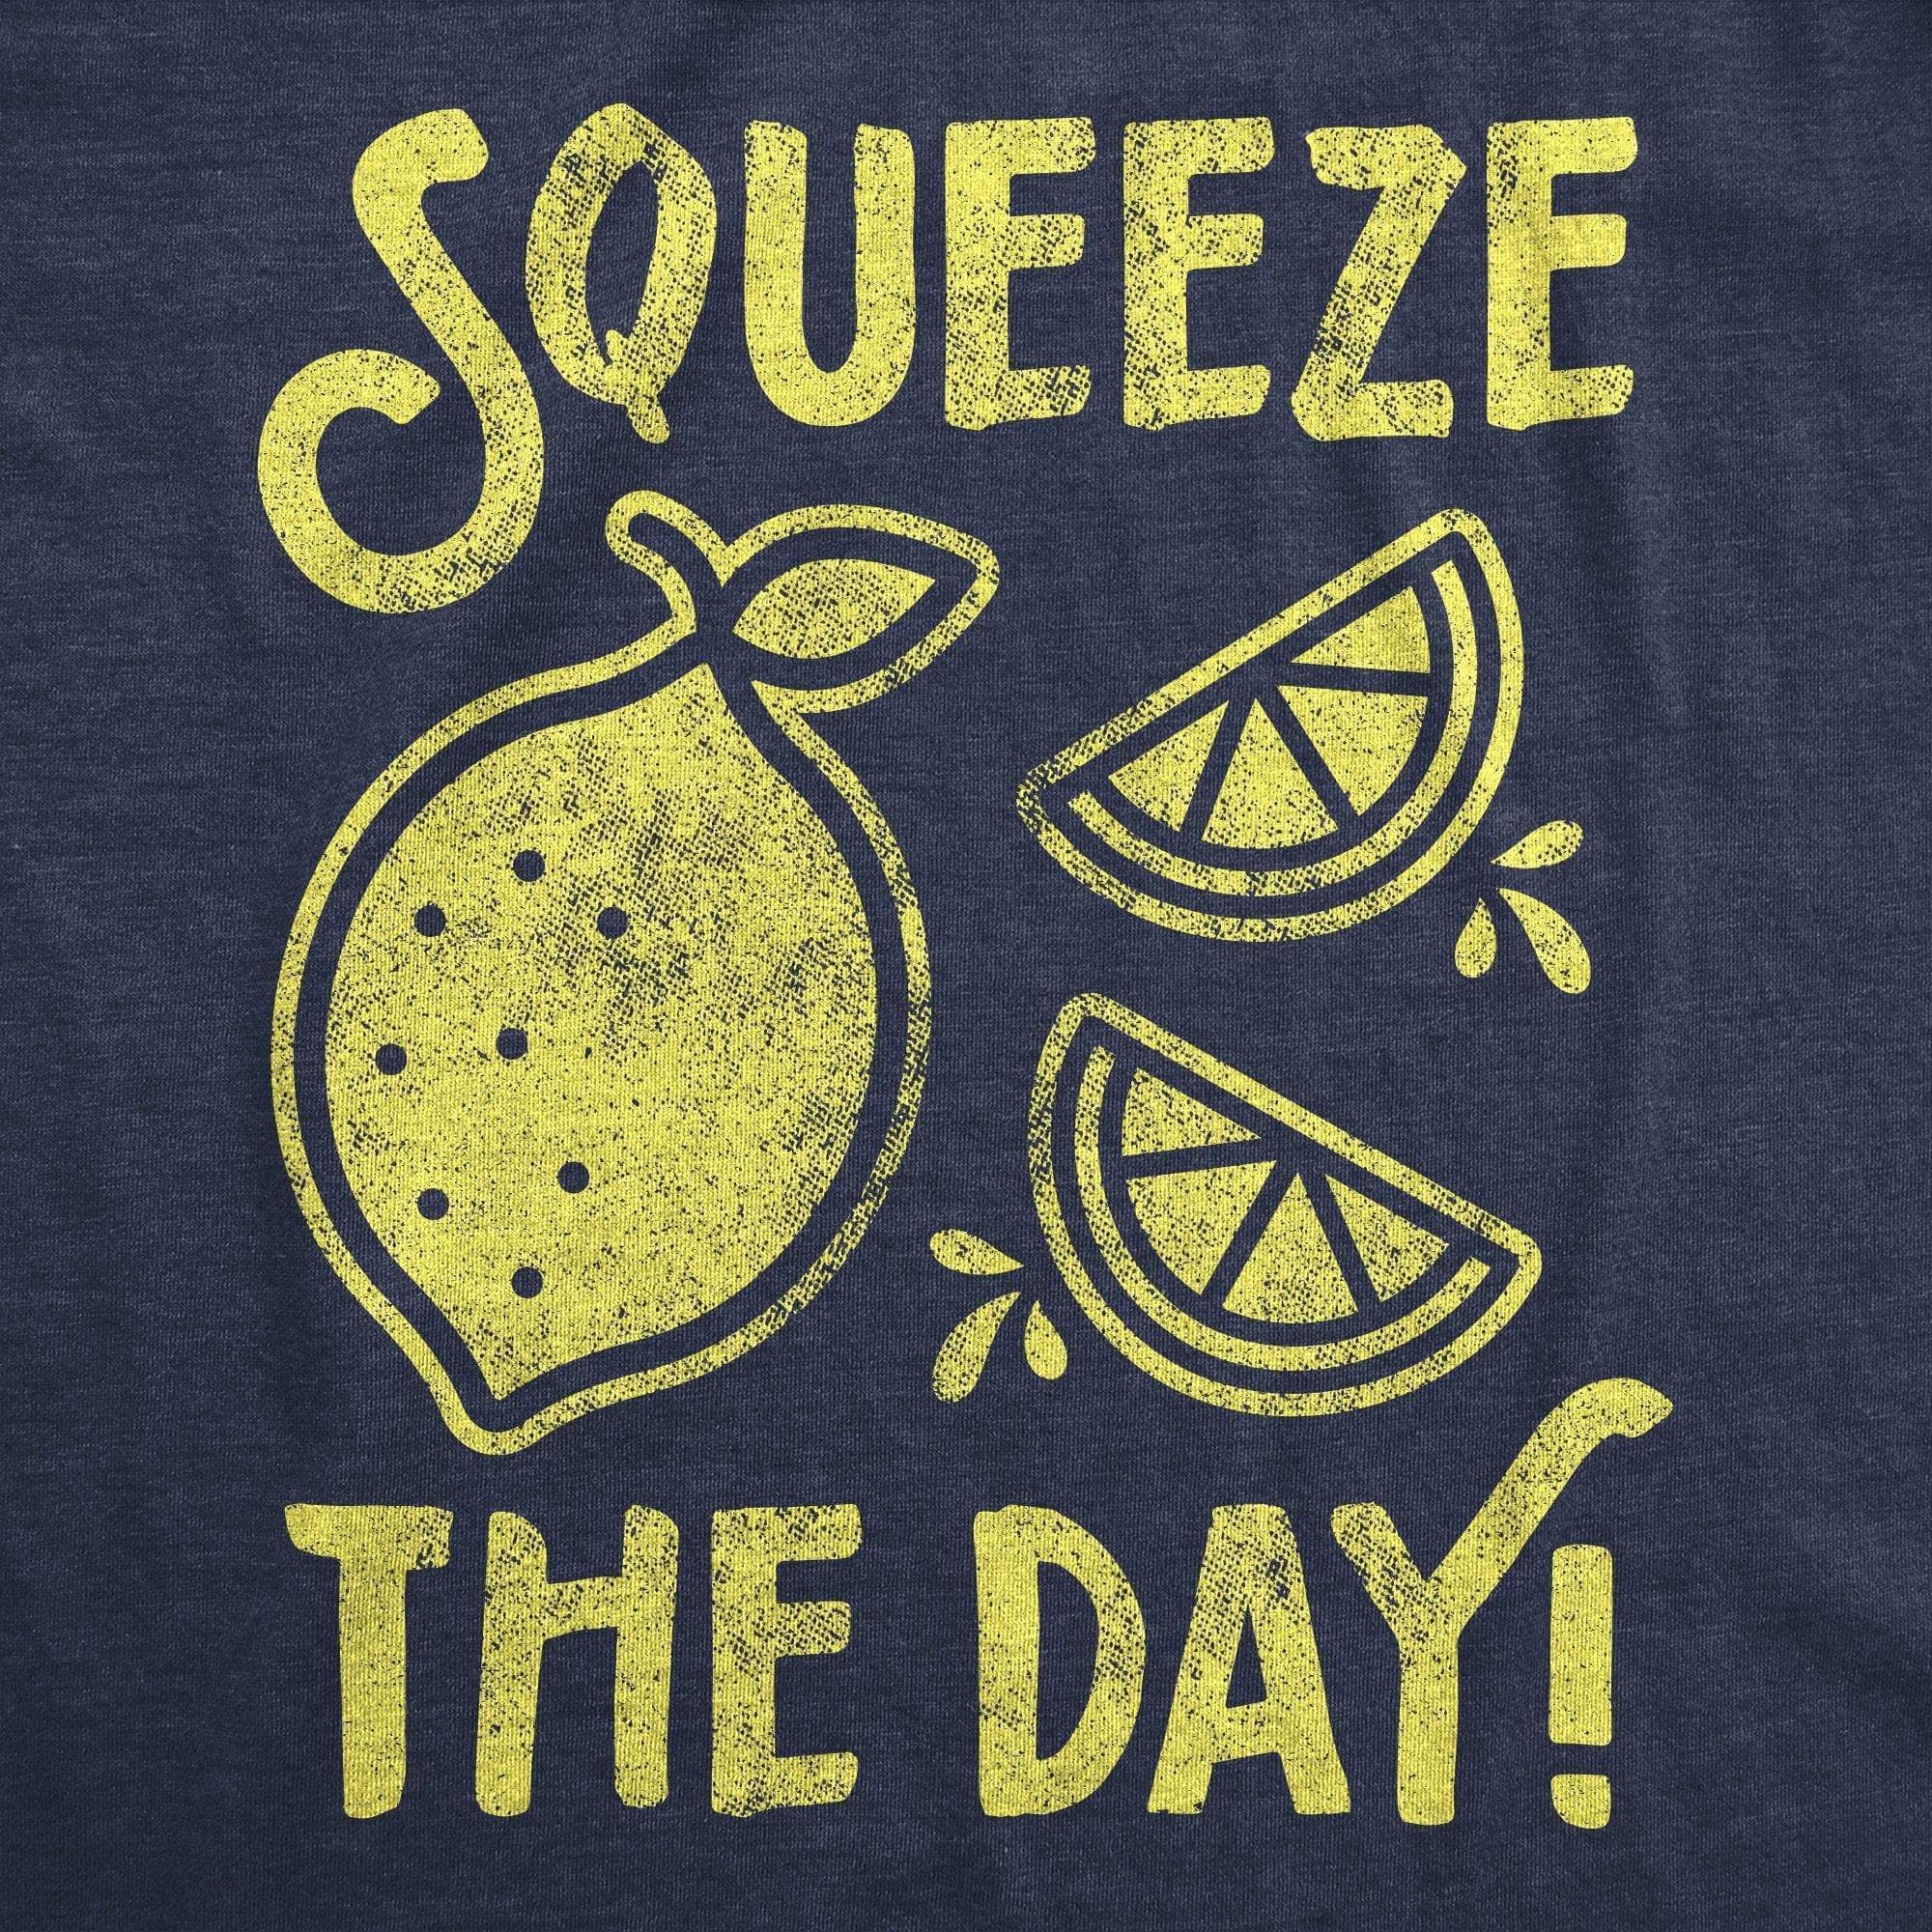 Squeeze The Day Women's Tshirt - Crazy Dog T-Shirts